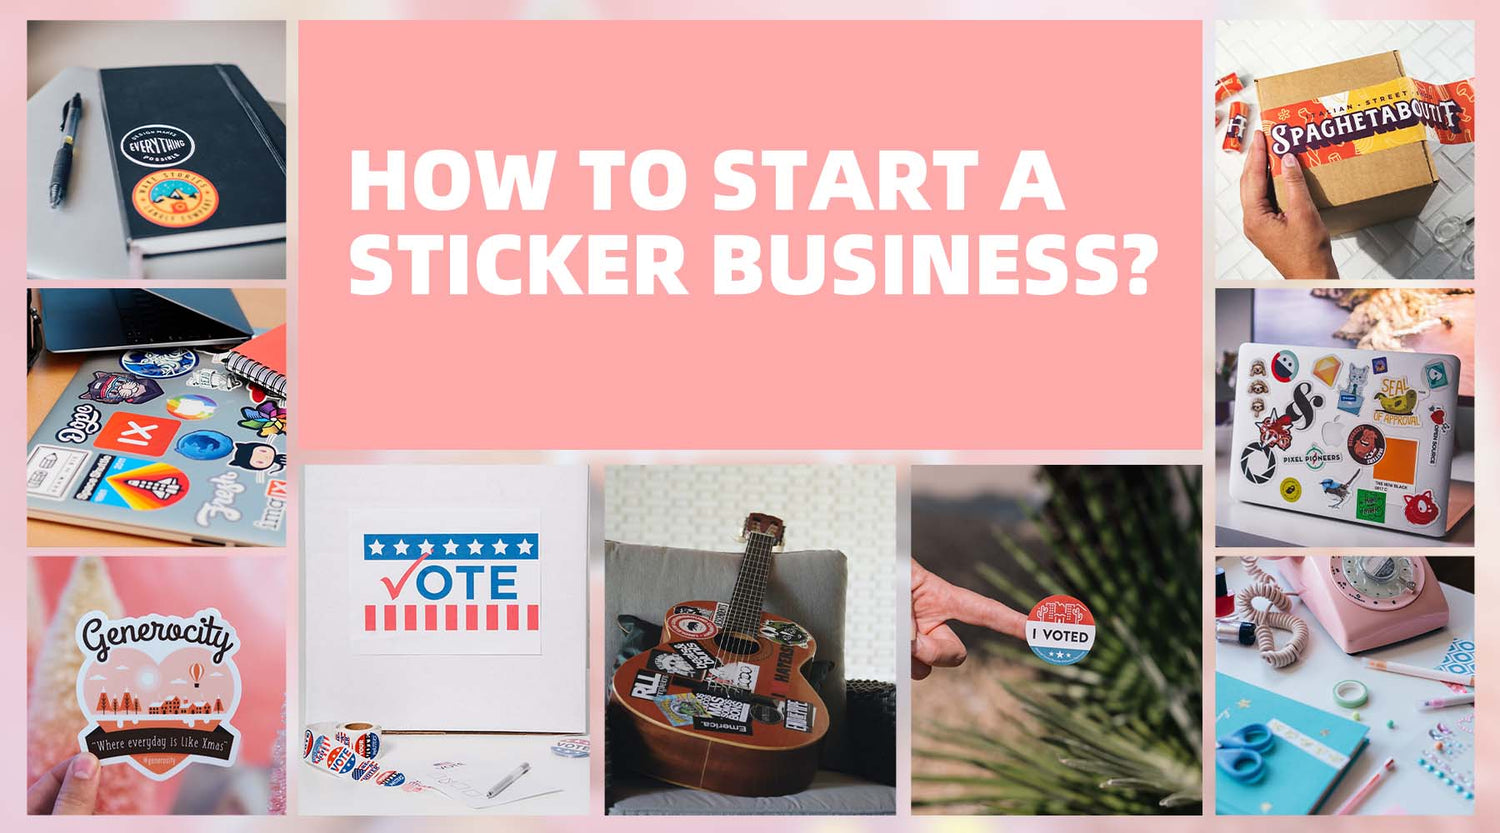 Bulk Stickers Give Your Brand a Distinctive Appearance